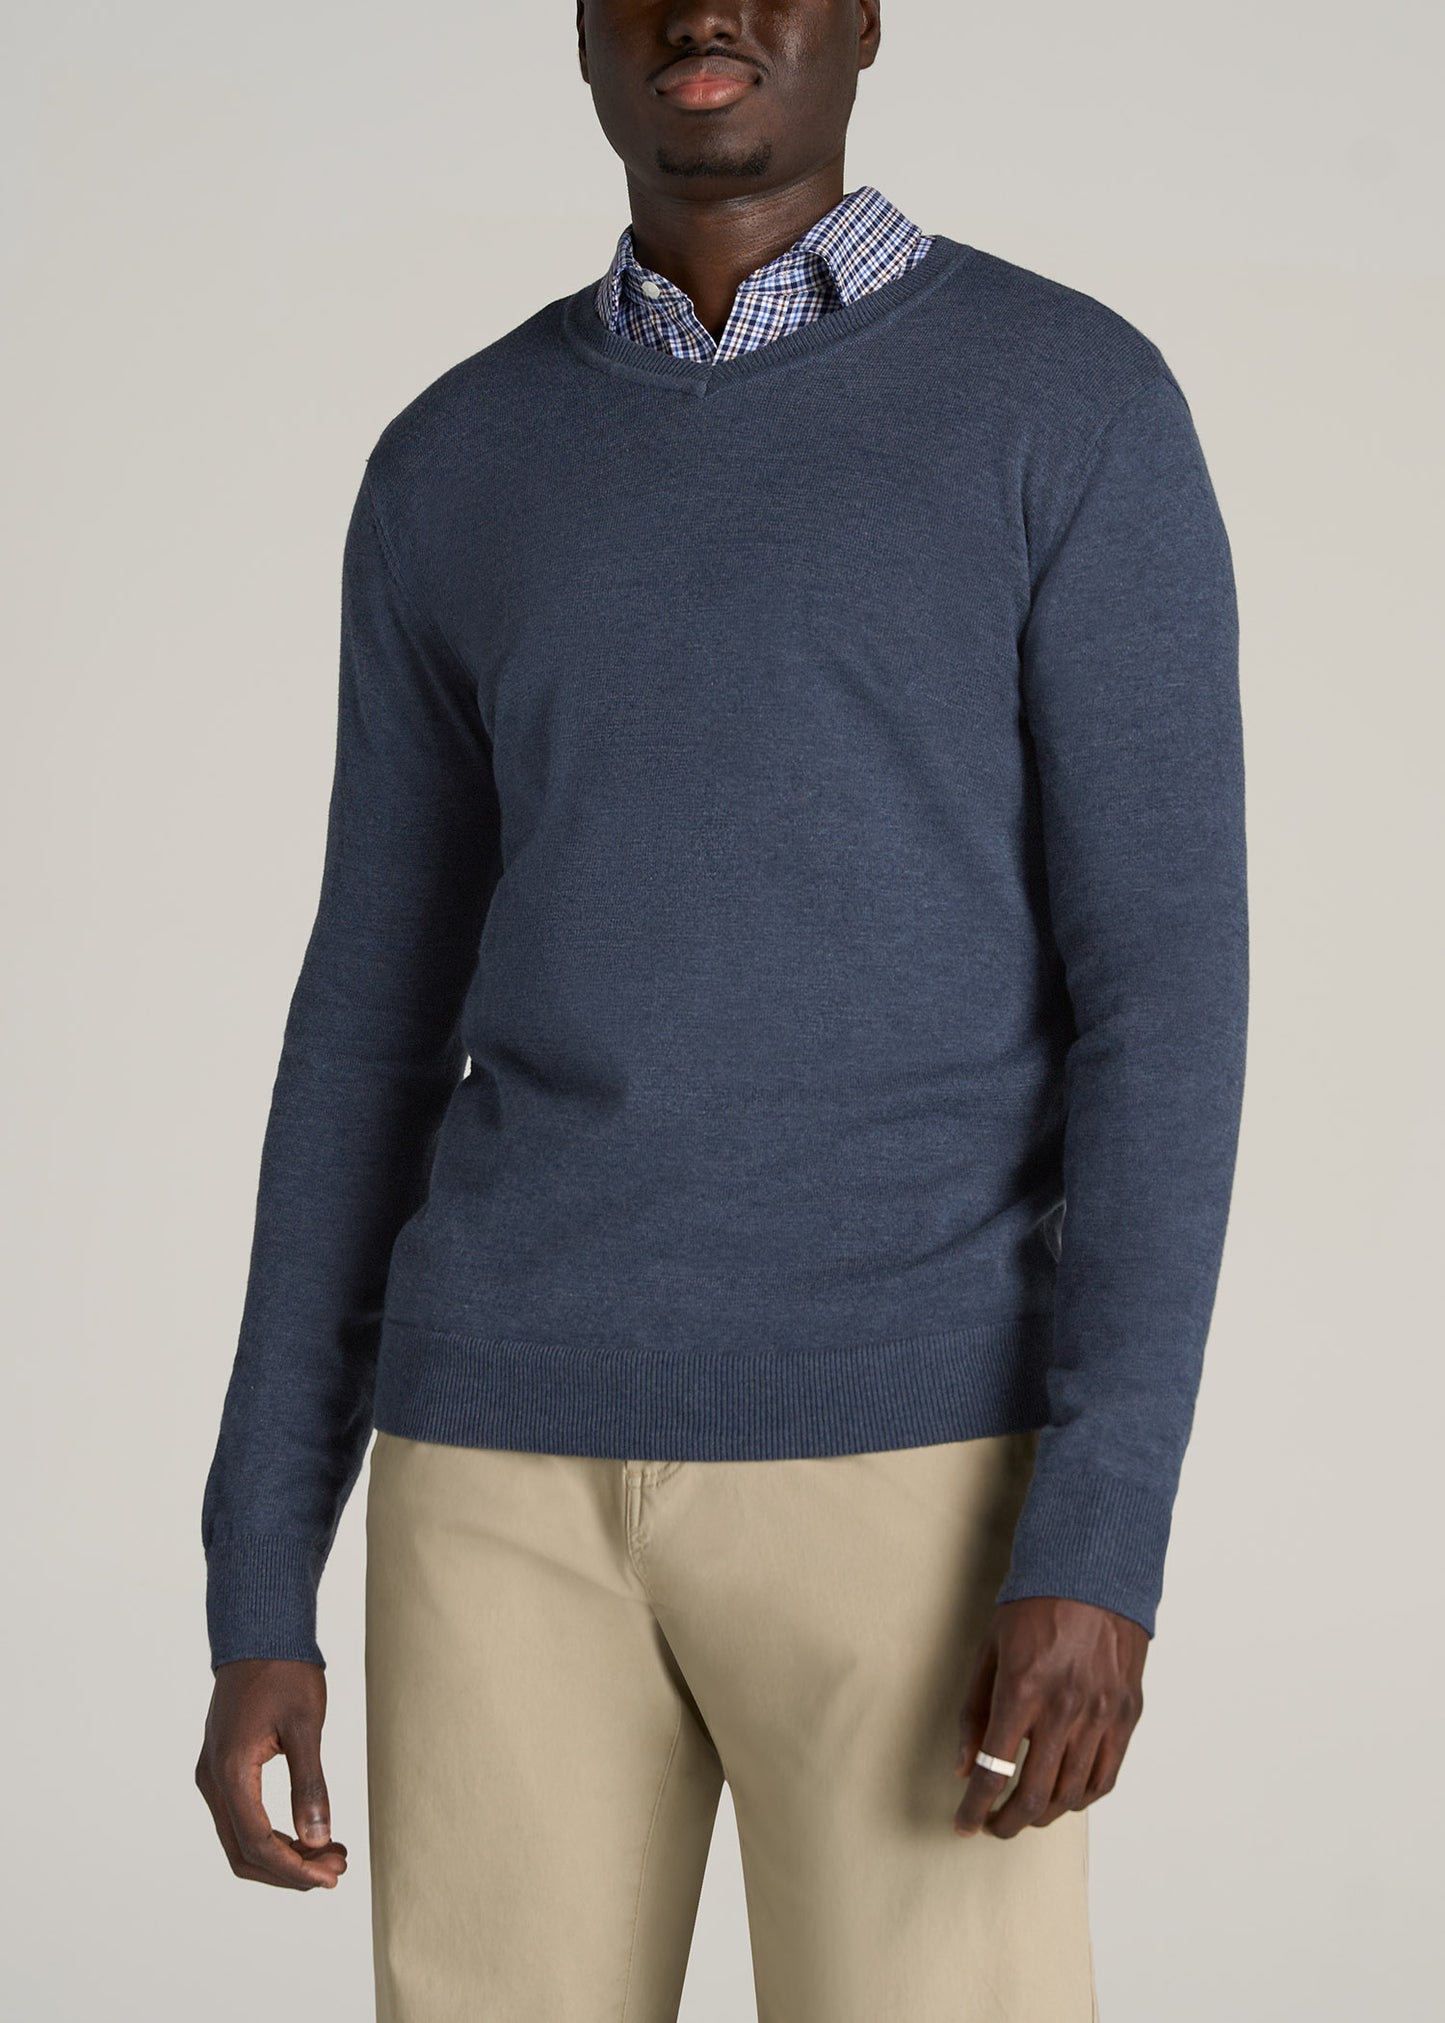    American-Tall-Men-Everyday-V-Neck-Sweater-Navy-Mix-front